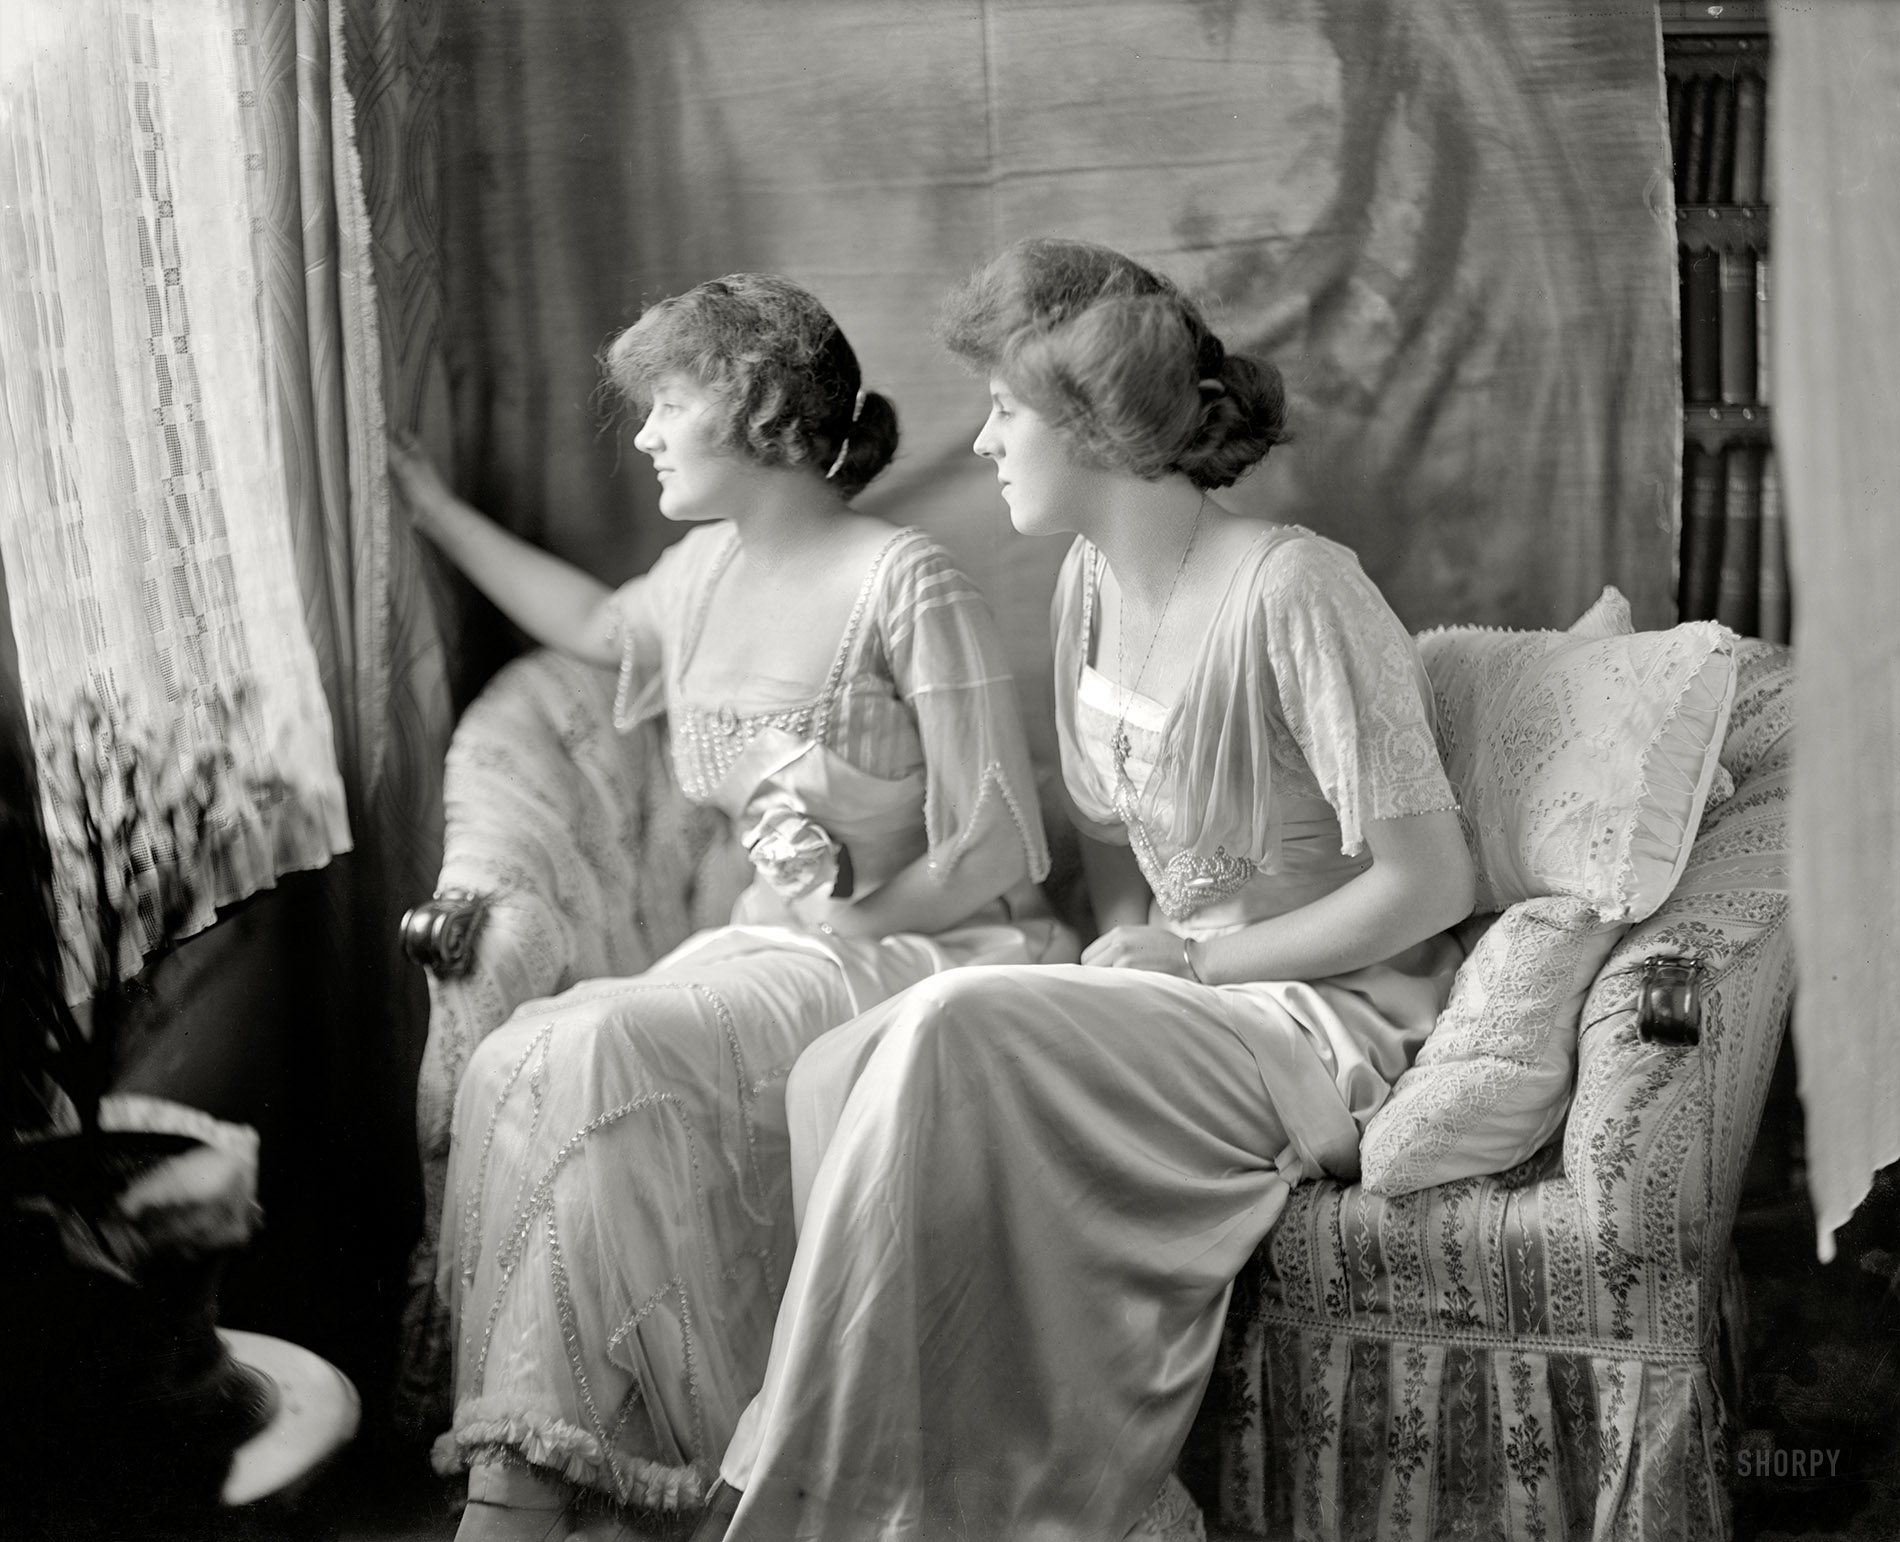 Washington, D.C., circa 1918. In the inimitable stylings of Harris & Ewing: "Cleveland, Esther, Miss. Group." Esther Cleveland at right, daughter of Grover Cleveland, the only presidential child born in the White House. View full size.